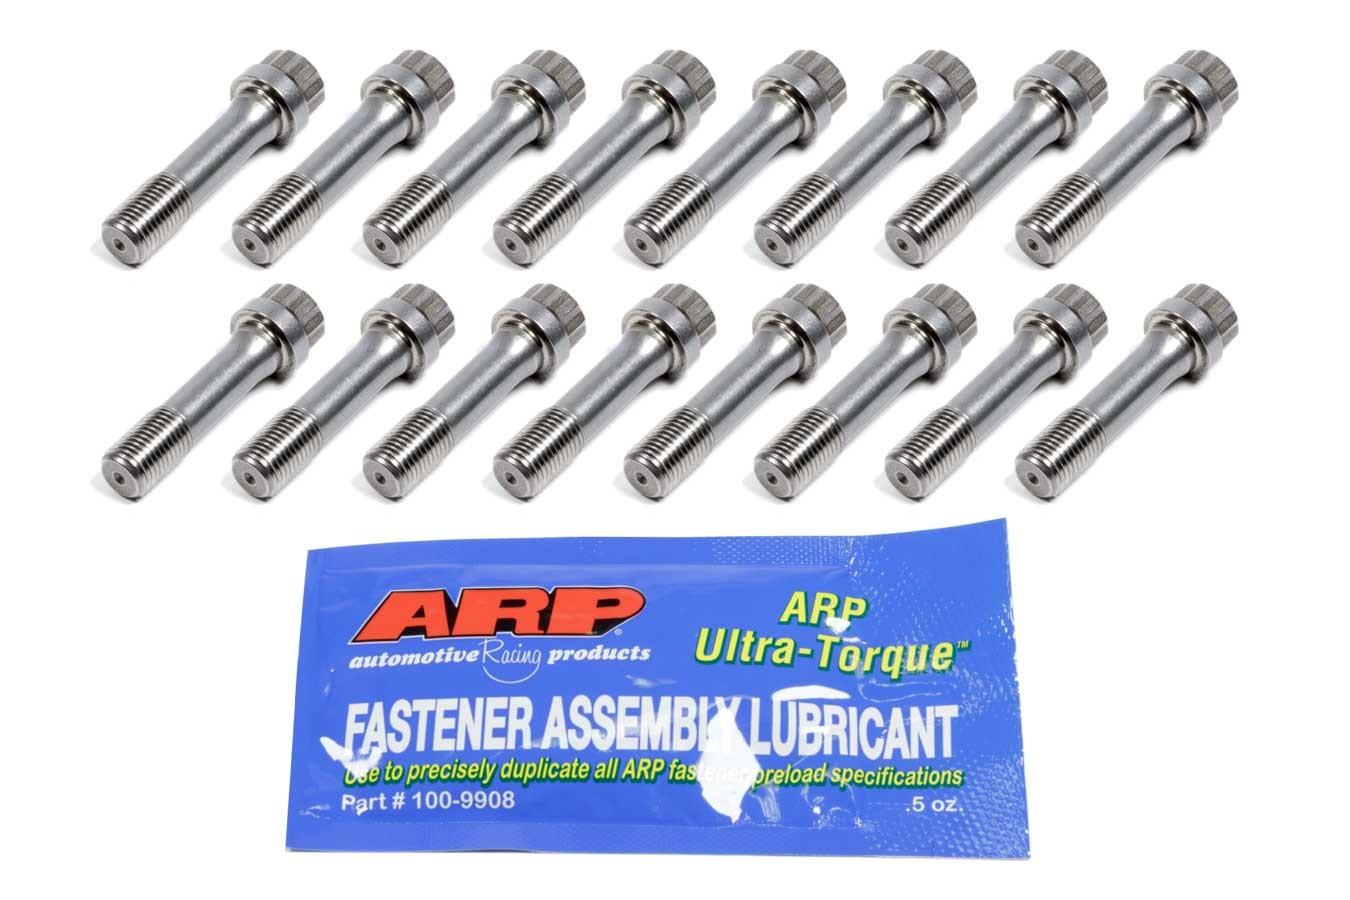 Eagle 20070 Connecting Rod Bolt Kit, 3/8 in Bolt, 1.500 in Long, 12 Point Head, ARP 2000, Set of 16